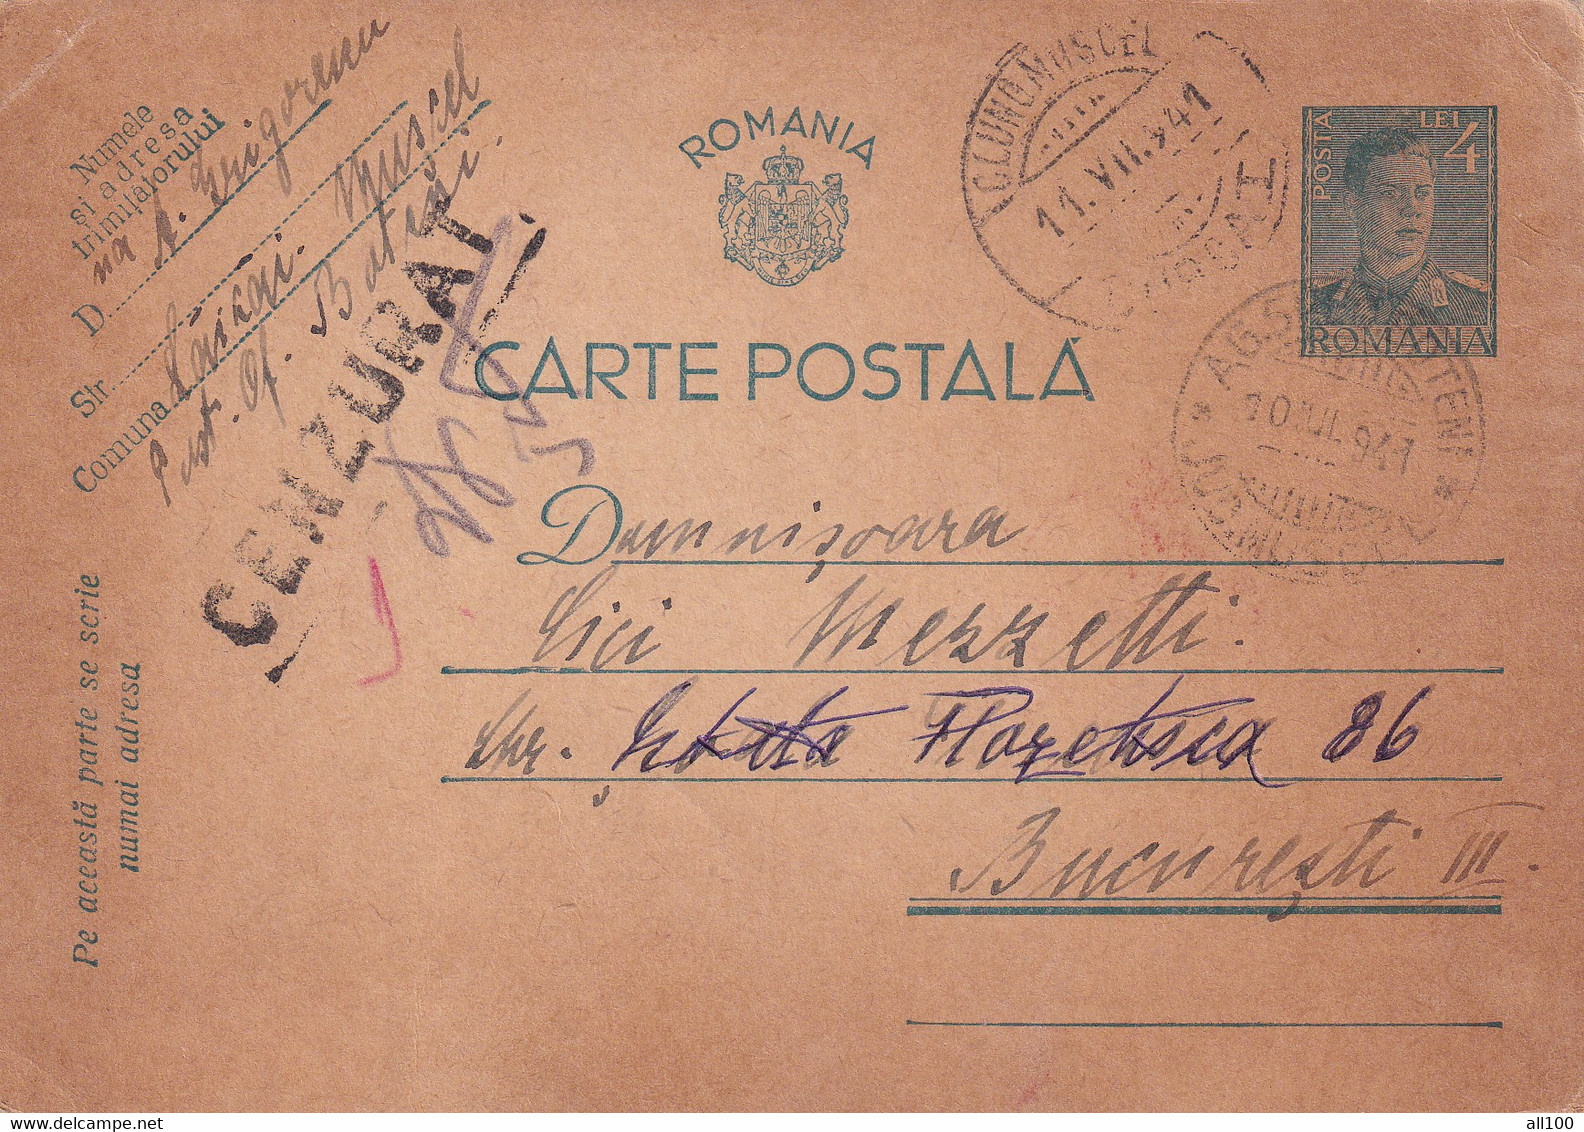 A16460 - MILITARY LETTER  POSTAL STATIONERY CENZORED CAMPULUNG MUSCEL  KING MICHAEL 4 LEI 1941 - 2de Wereldoorlog (Brieven)